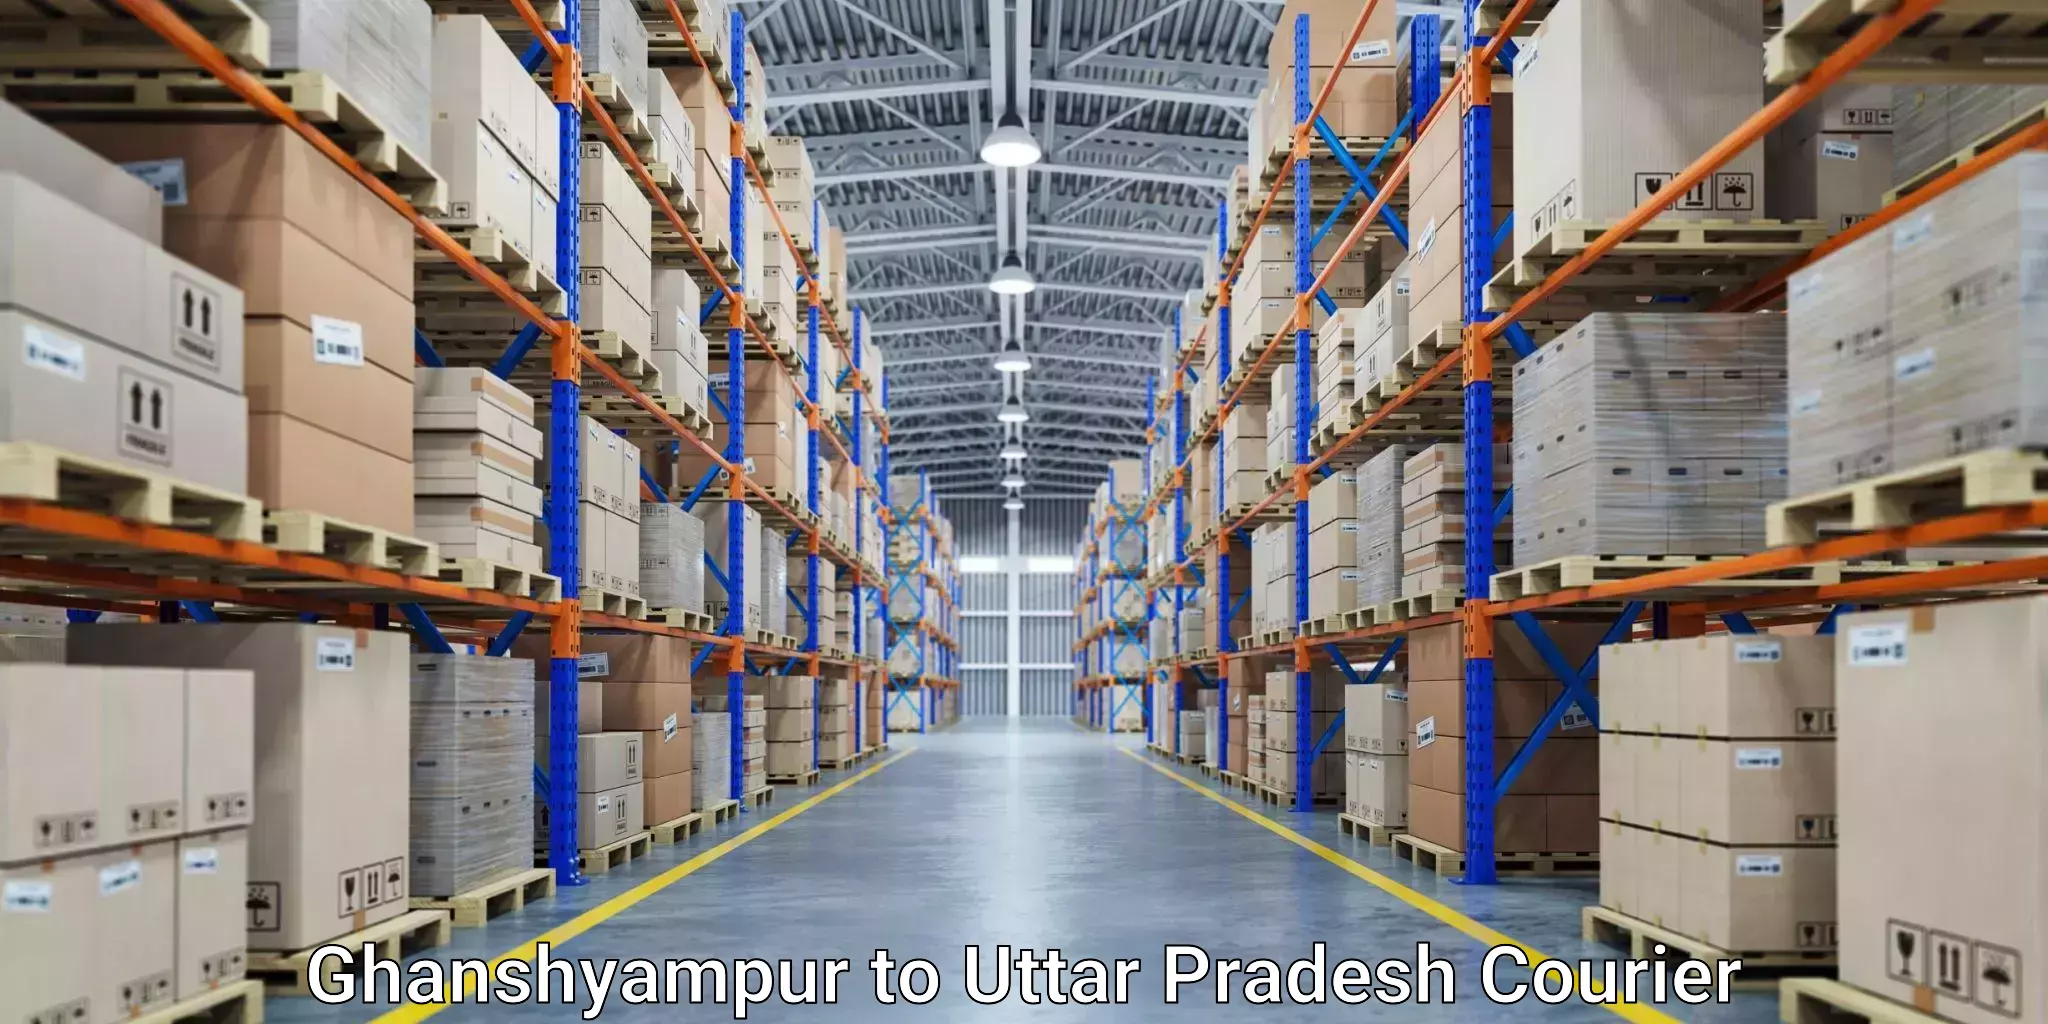 Reliable shipping partners Ghanshyampur to Pilibhit